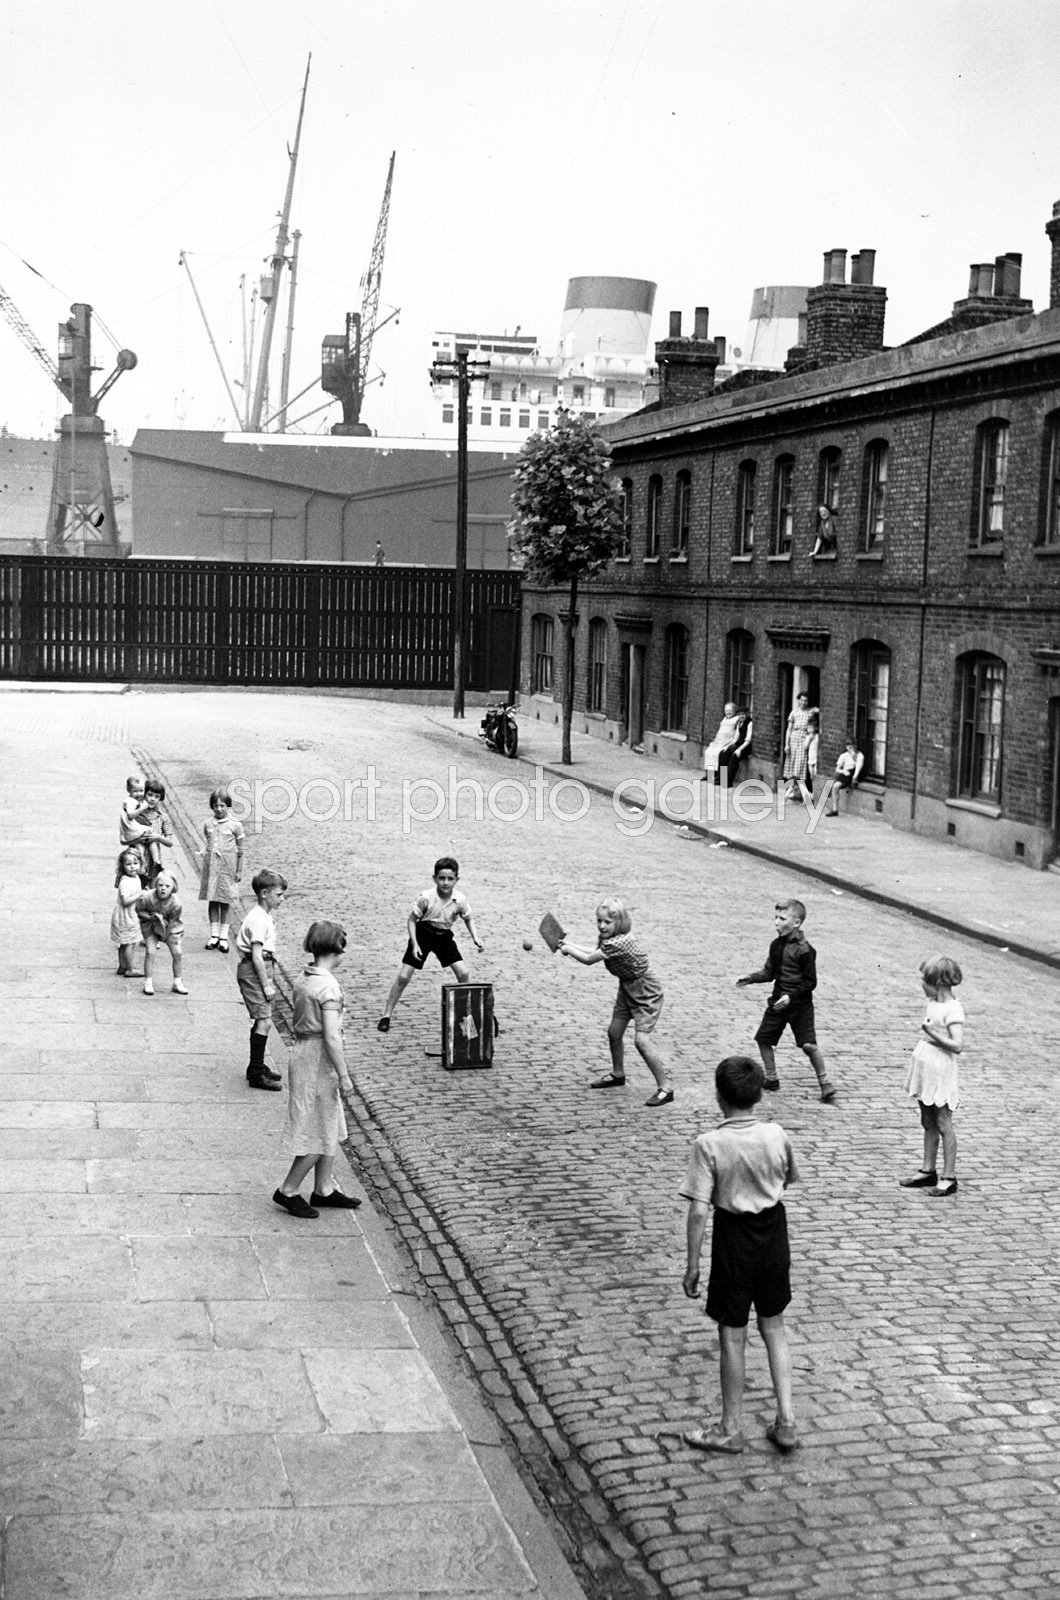 Cricket LONDON Playgrounds for the London child 1926 old print Children 